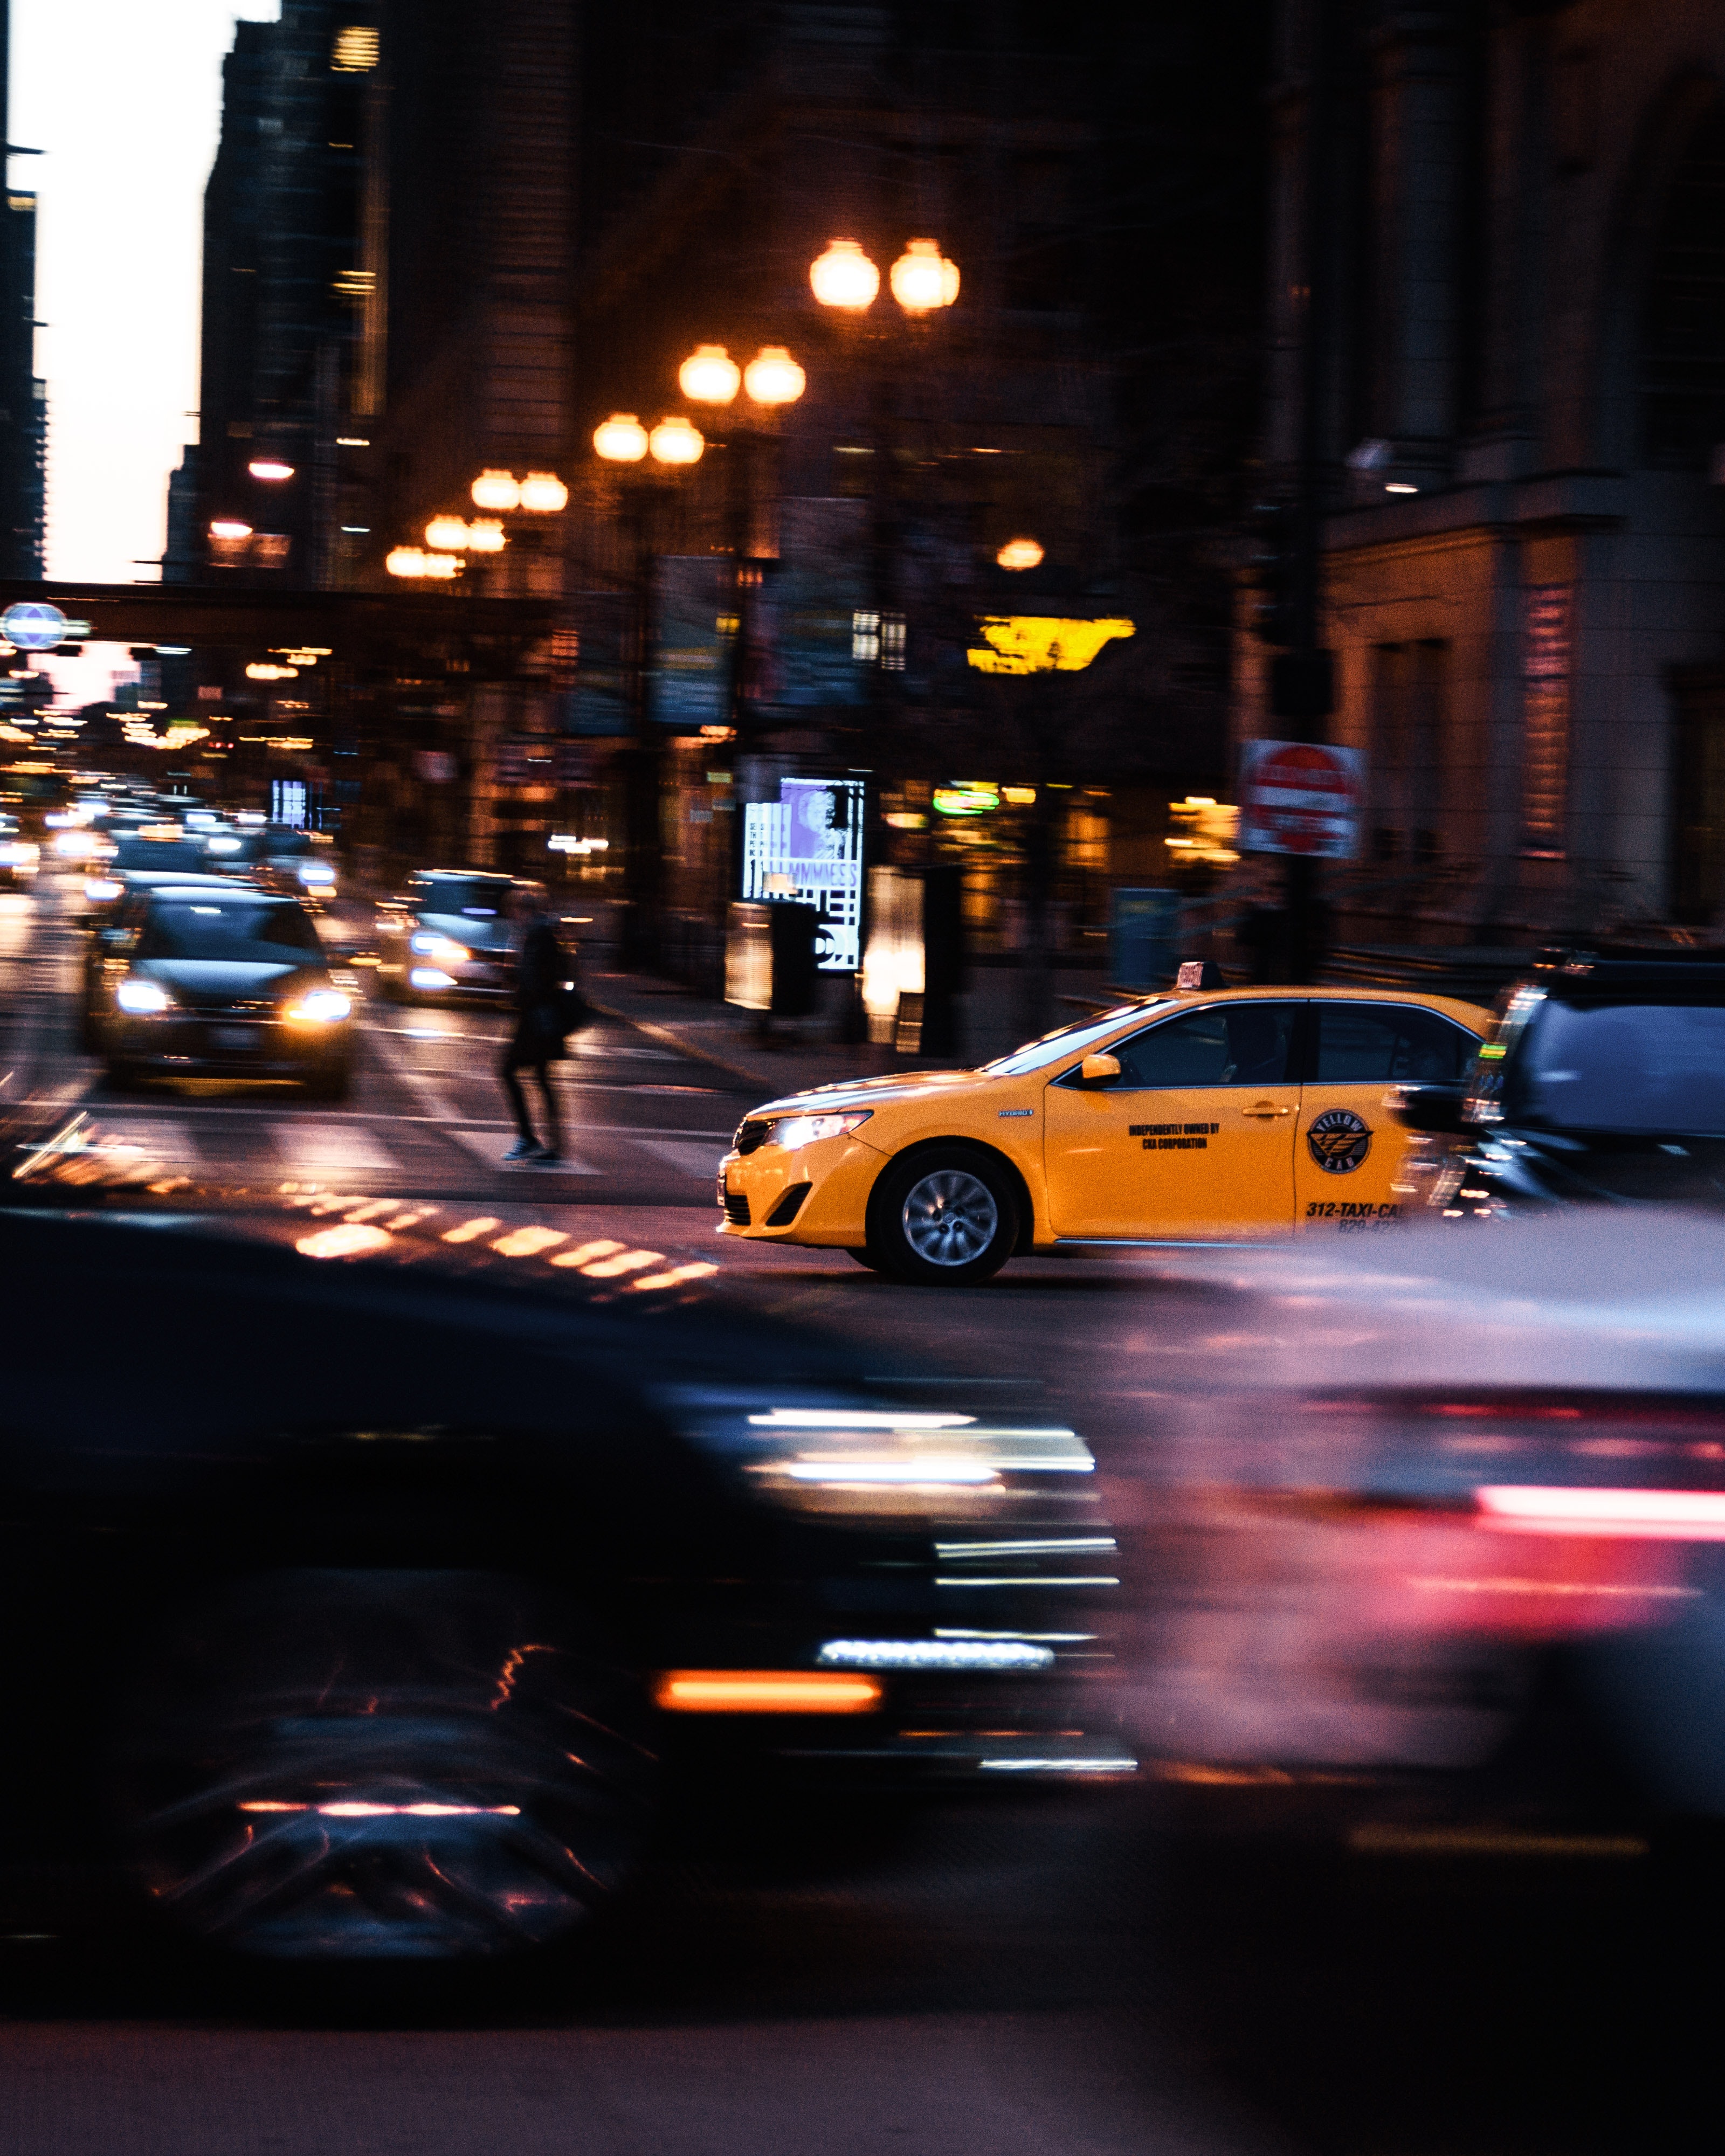 A yellow cab passing on the road